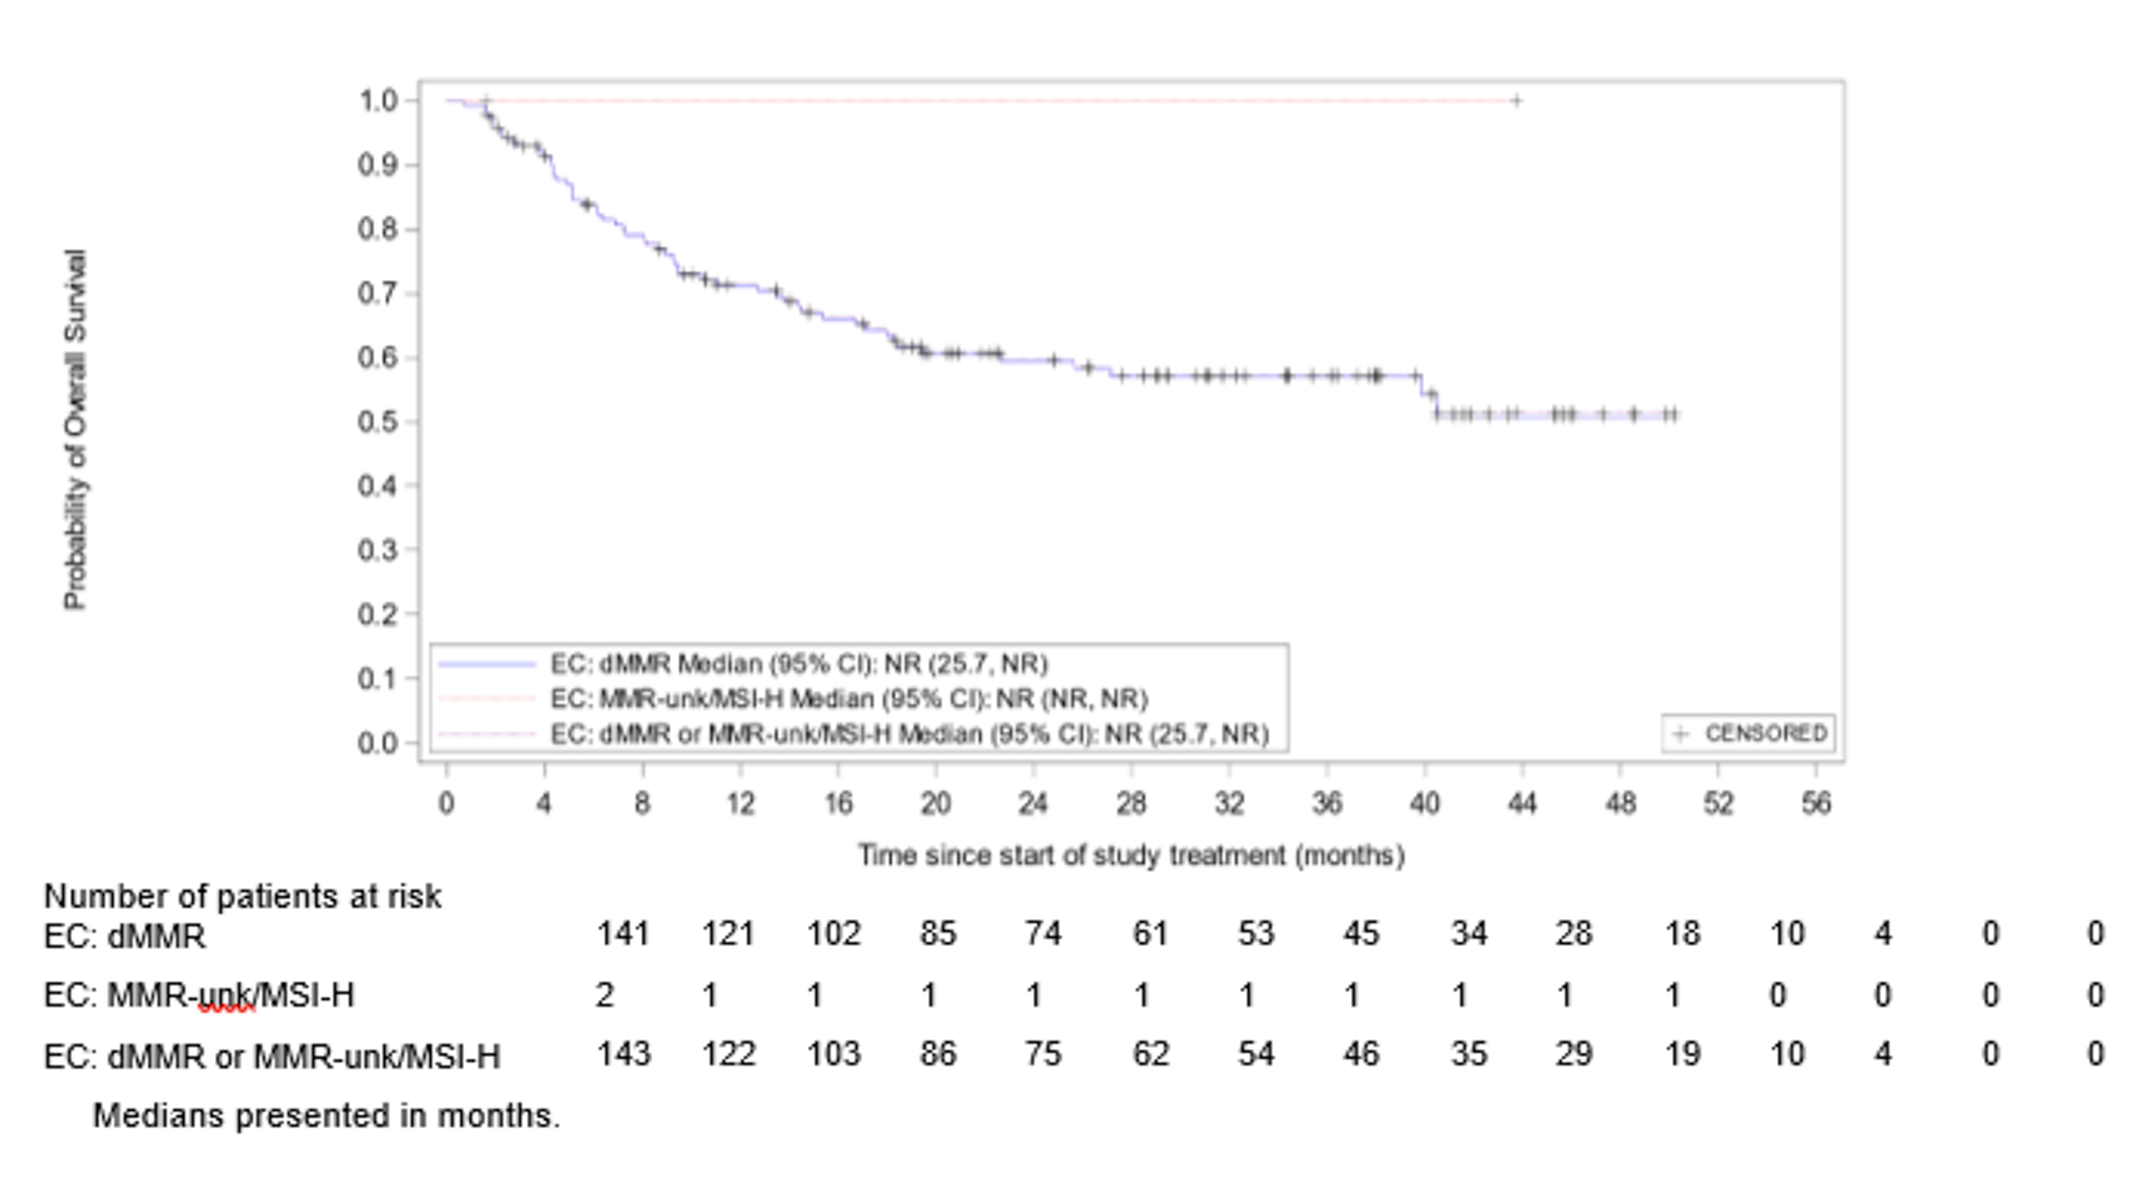 Kaplan-Meier estimates of OS at IA-3 in patients with dMMR or MSI-H EC for the primary efficacy analysis dataset. The total number of at-risk patients in the dMMR or MMR-unk/MSI-H EC at 0, 4, 8, 12, 16, 20, 24, 28, 32, and 36 months was 122, 103, 86, 75, 62, 54, 46, 35, 29, 19, 10, 4, 0, and 0, respectively.